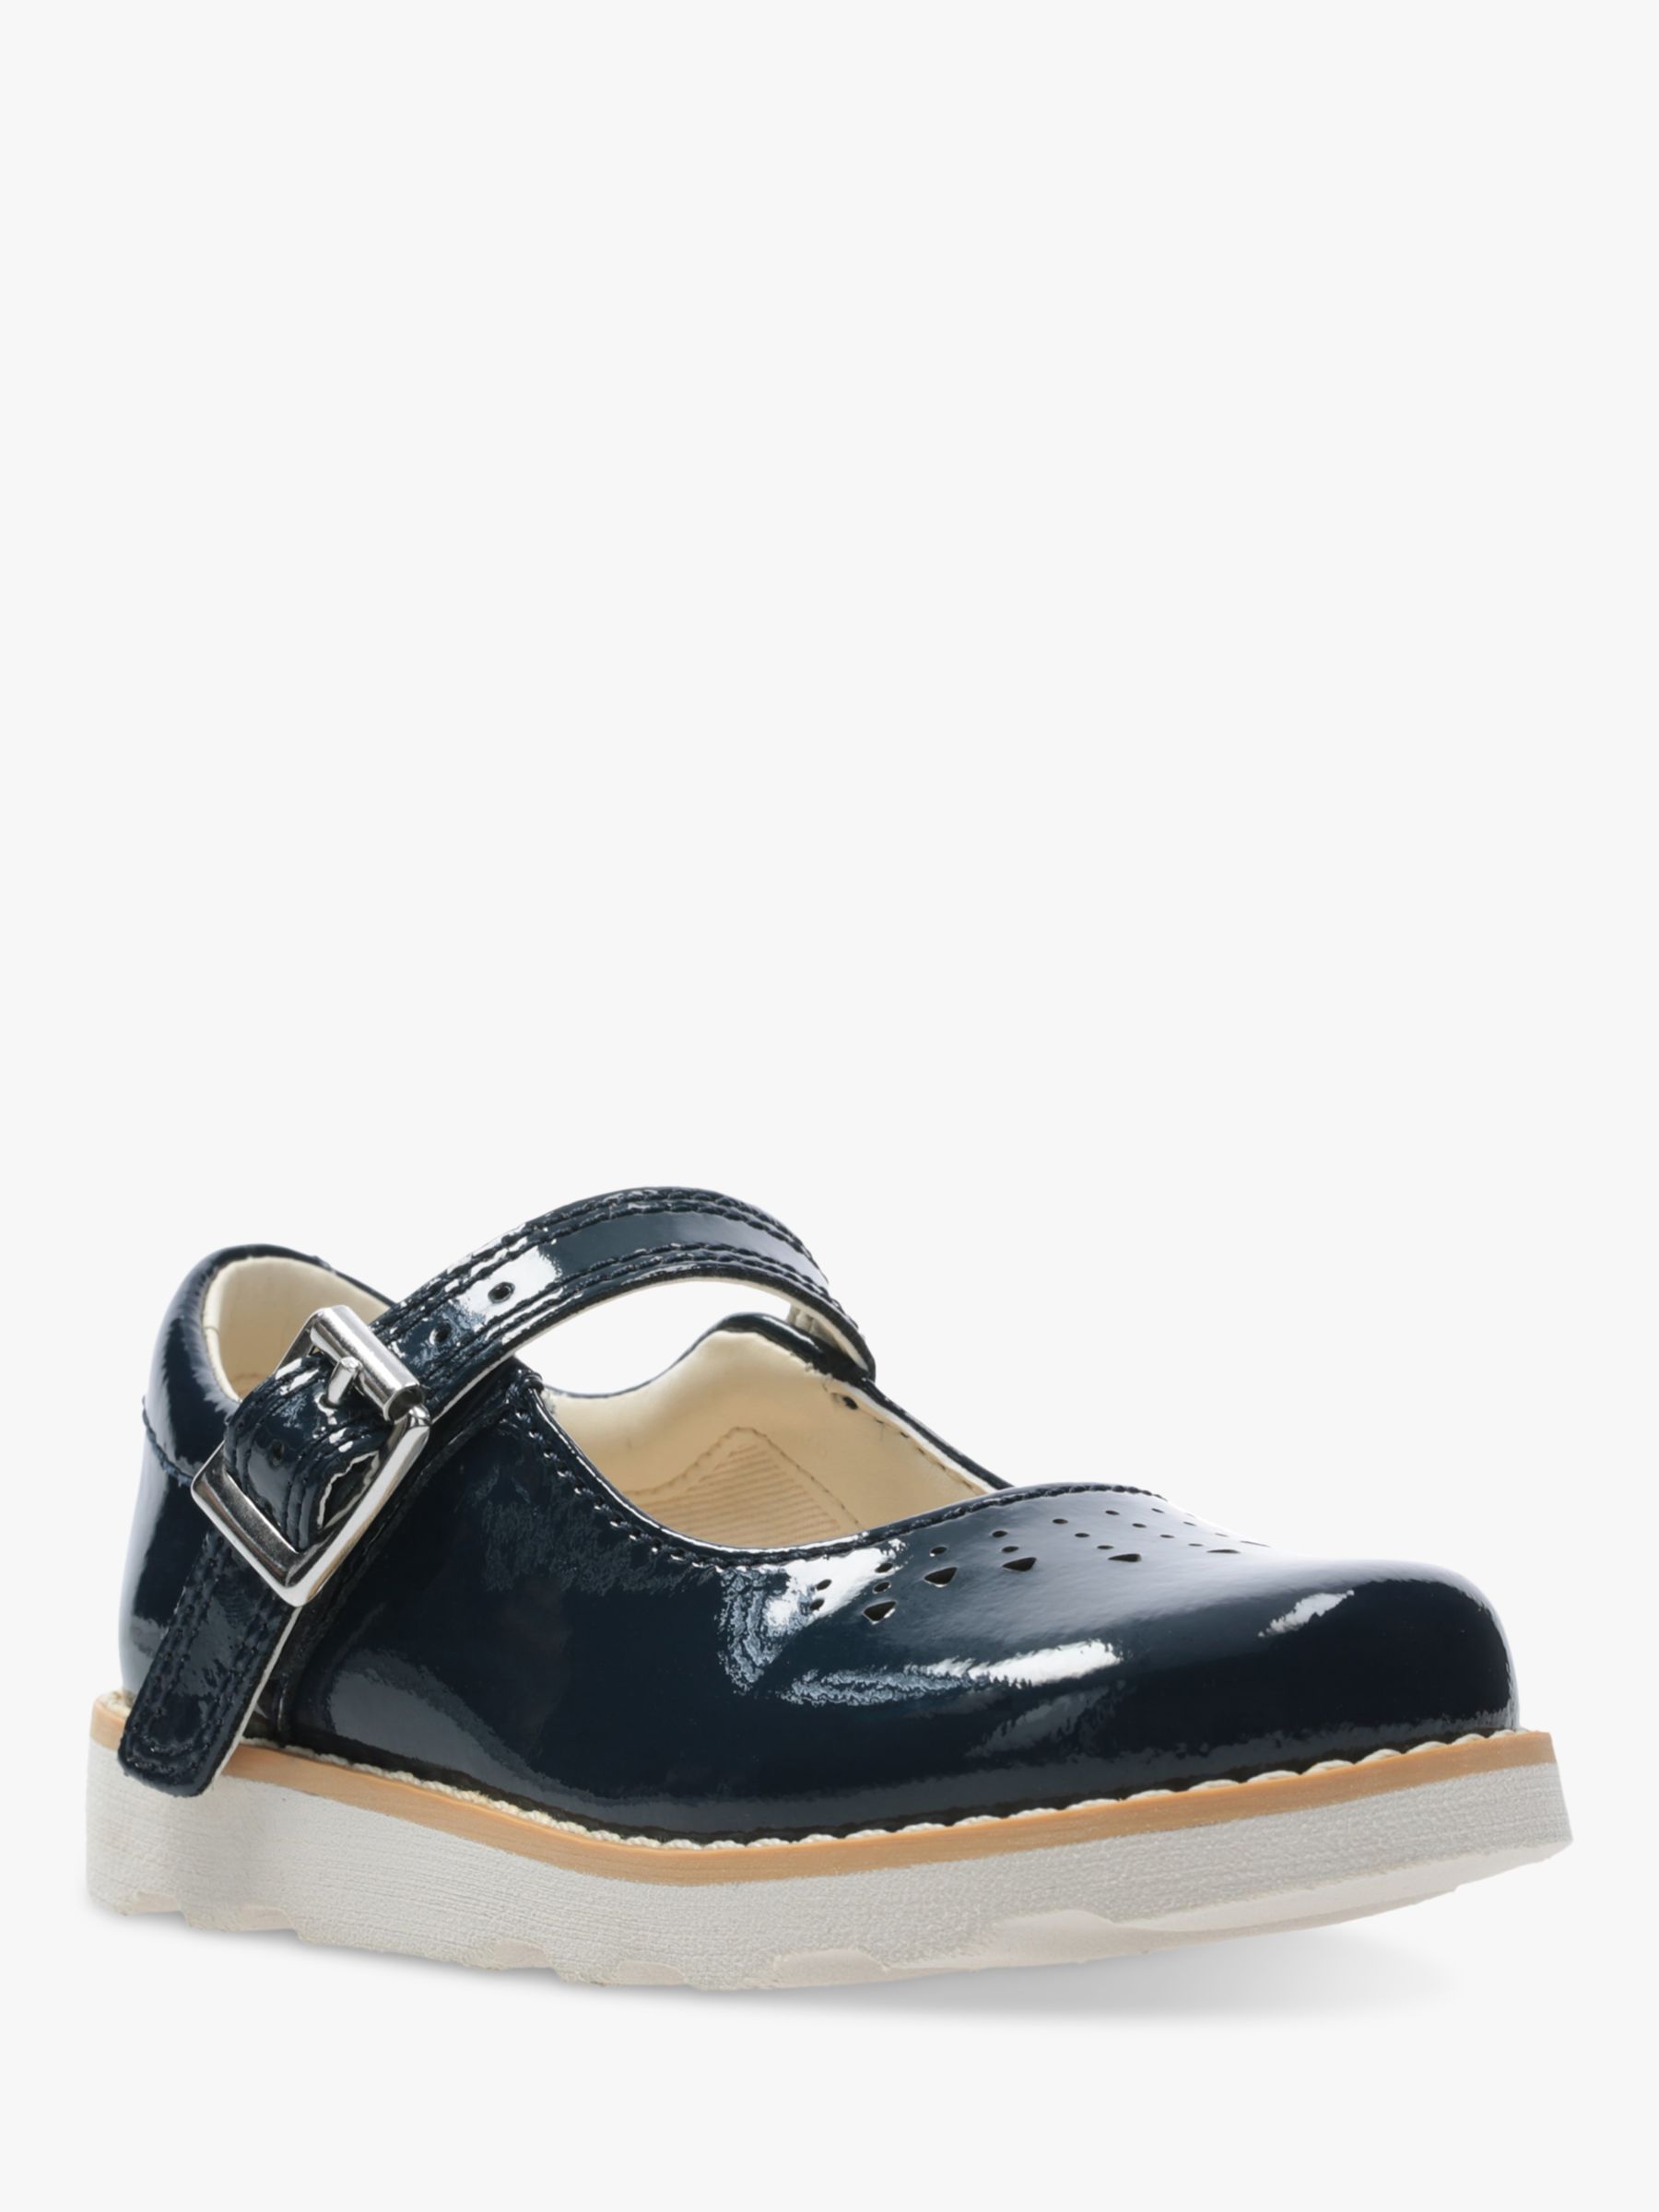 clarks buckle shoes